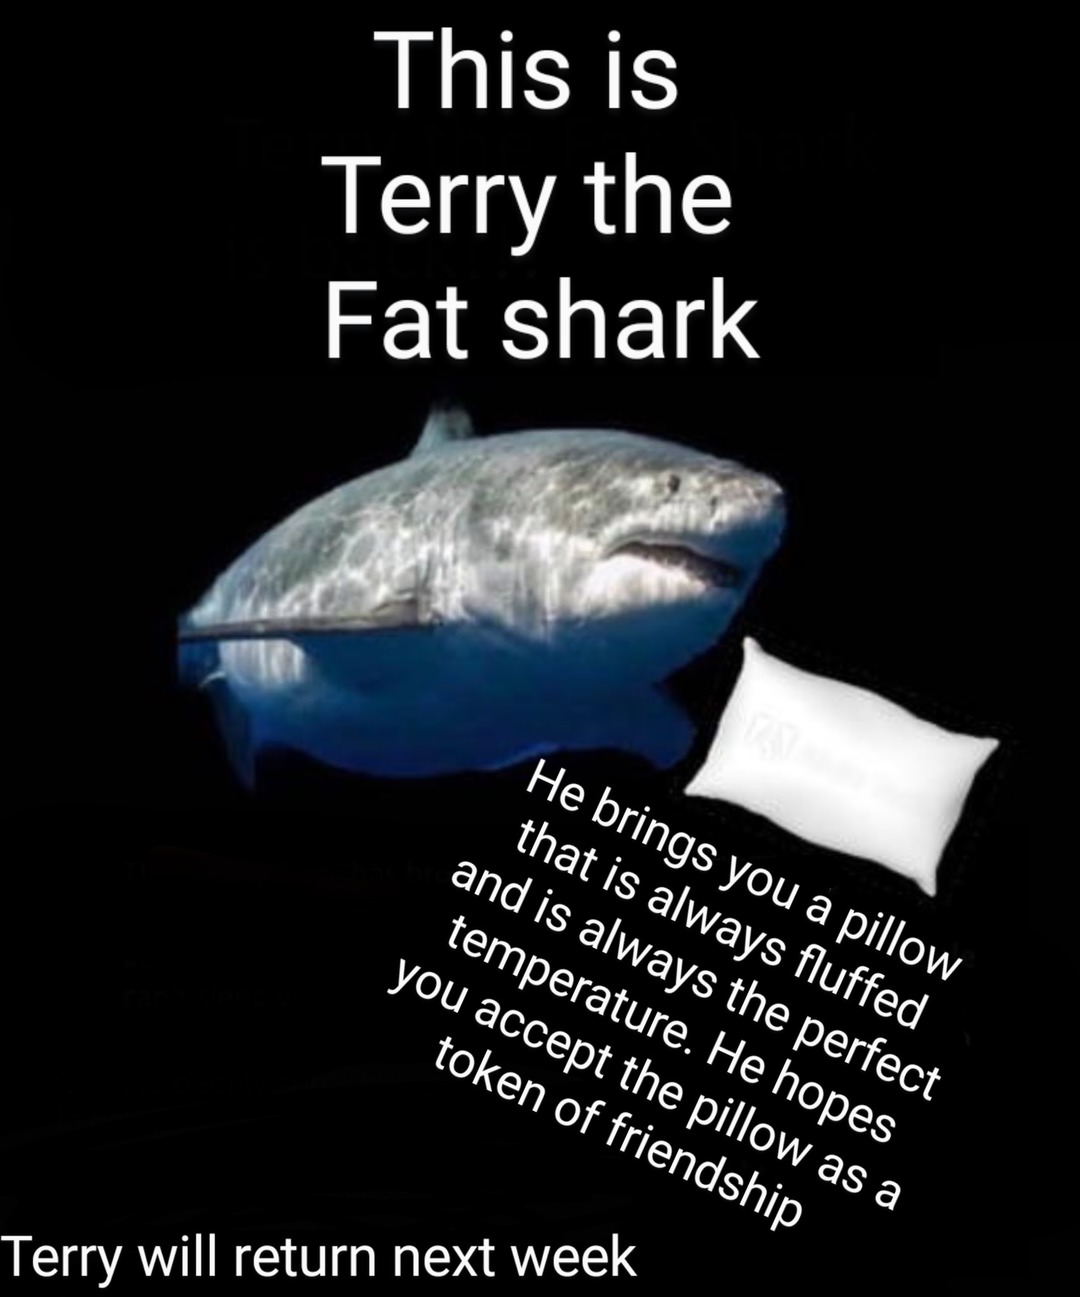 Last week terry brought a letter from king bonk, it was requested that terry translates the message. The message was translated by Bonkish expert, and fellow memedroid user @HUHh. Kung bonk requests reinforcements for the war he is currently in.